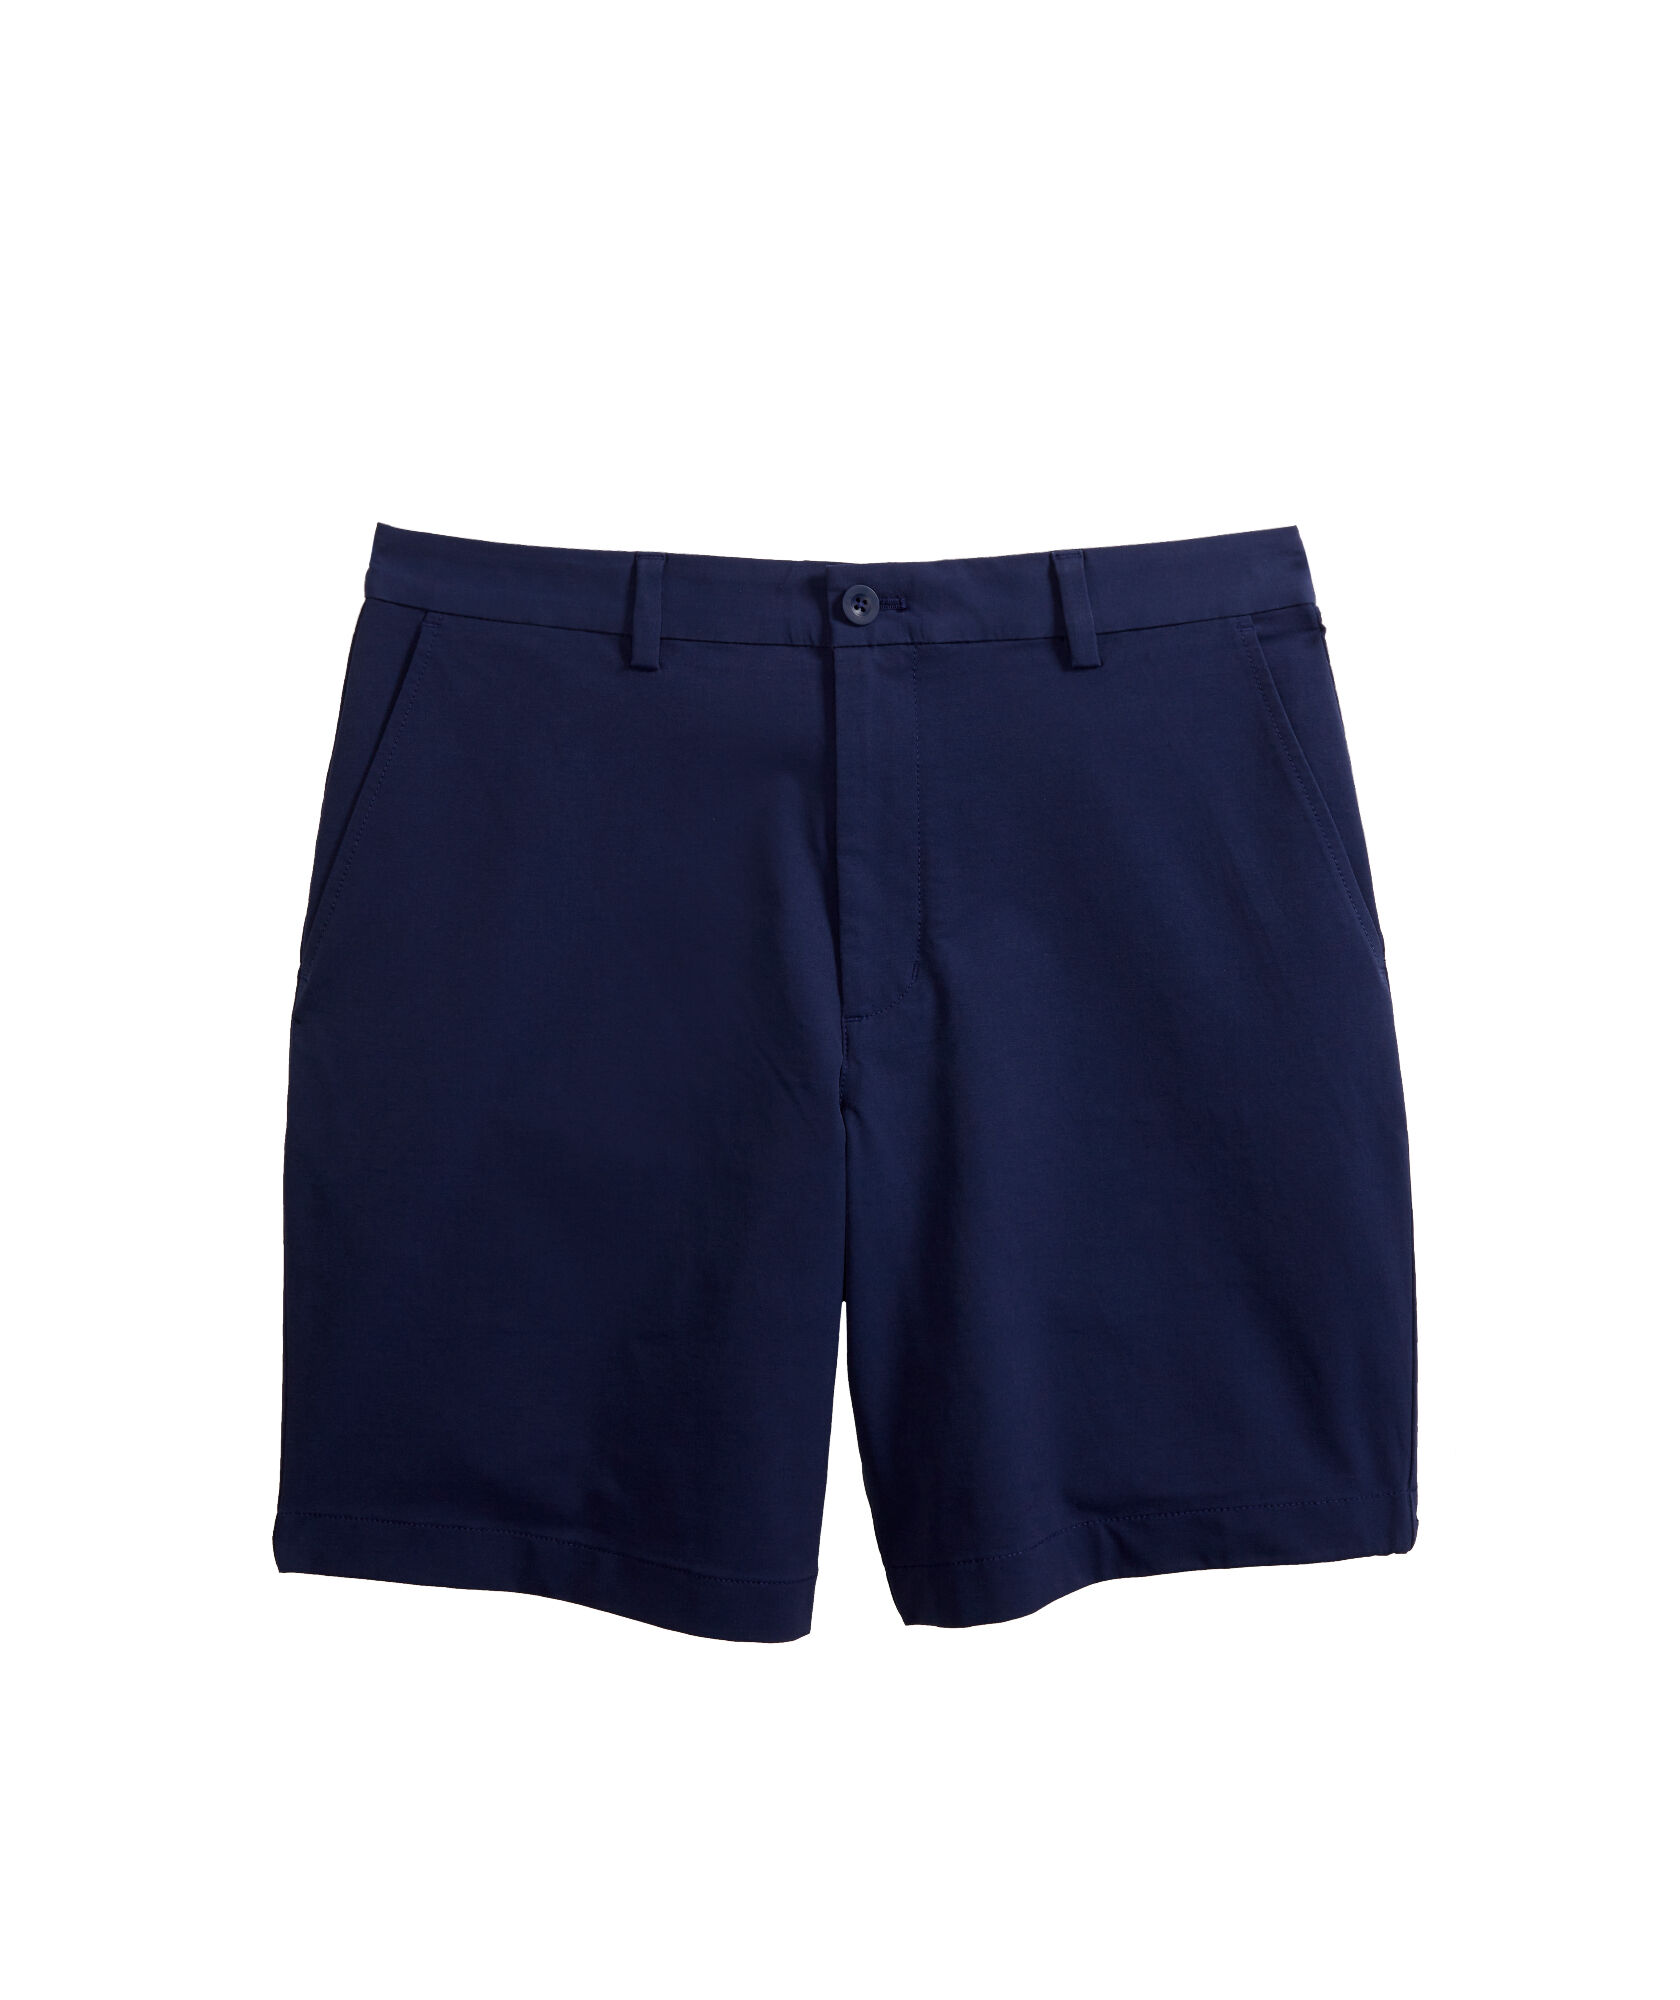 OUTLET 8 Inch Performance Shorts